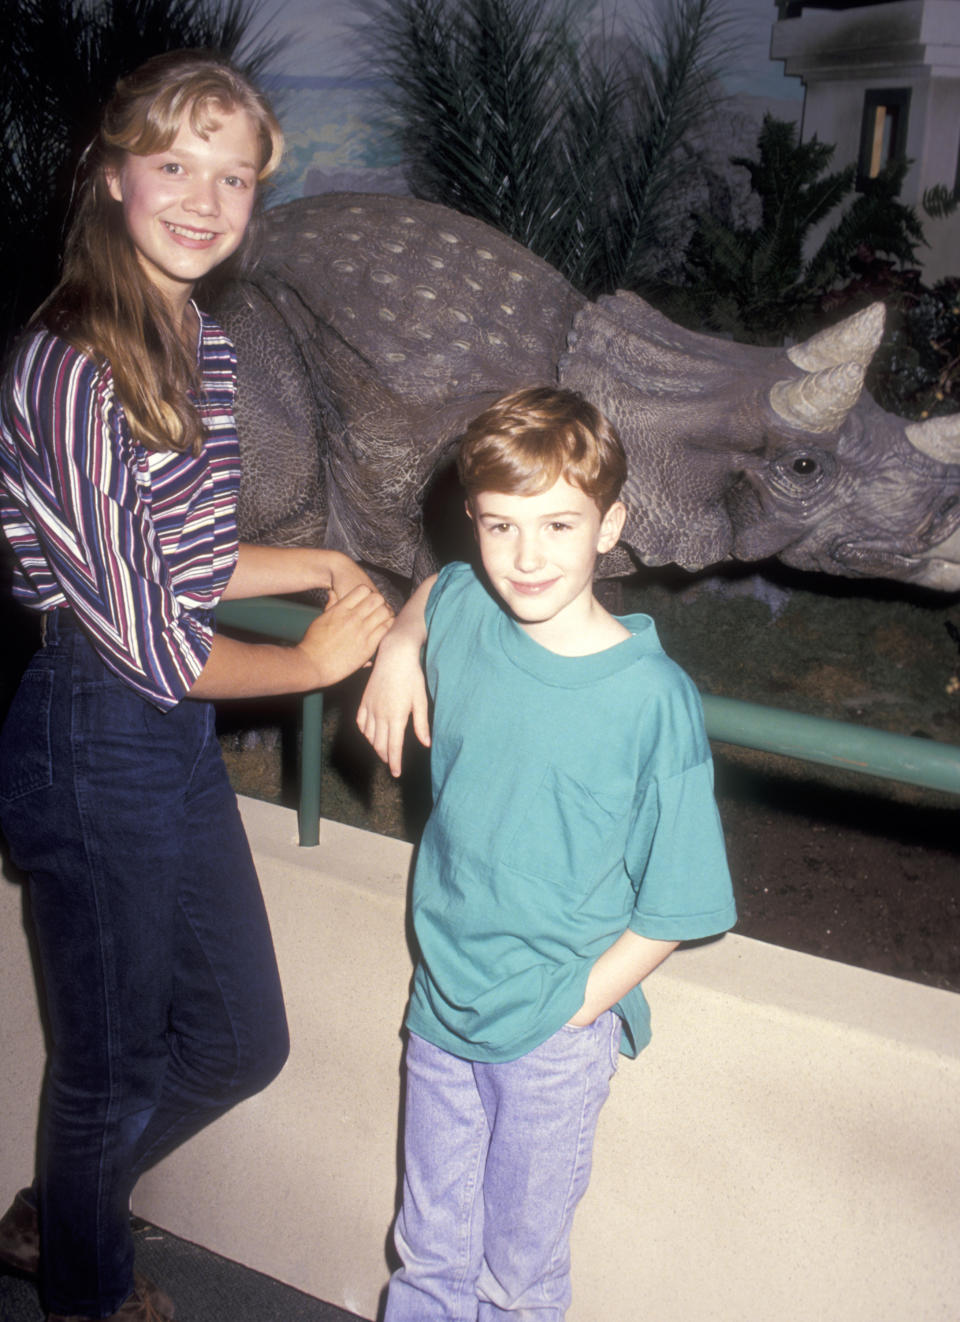 NEW YORK CITY - JUNE 10:  Actress Ariana Richards and actor Joseph Mazzello attend The American Museum of Natural History's "The Dinosaurs of Jurassic Park" Display on June 10, 1993 at The American Museum of Natural History in New York City. (Photo by Ron Galella, Ltd./Ron Galella Collection via Getty Images) 